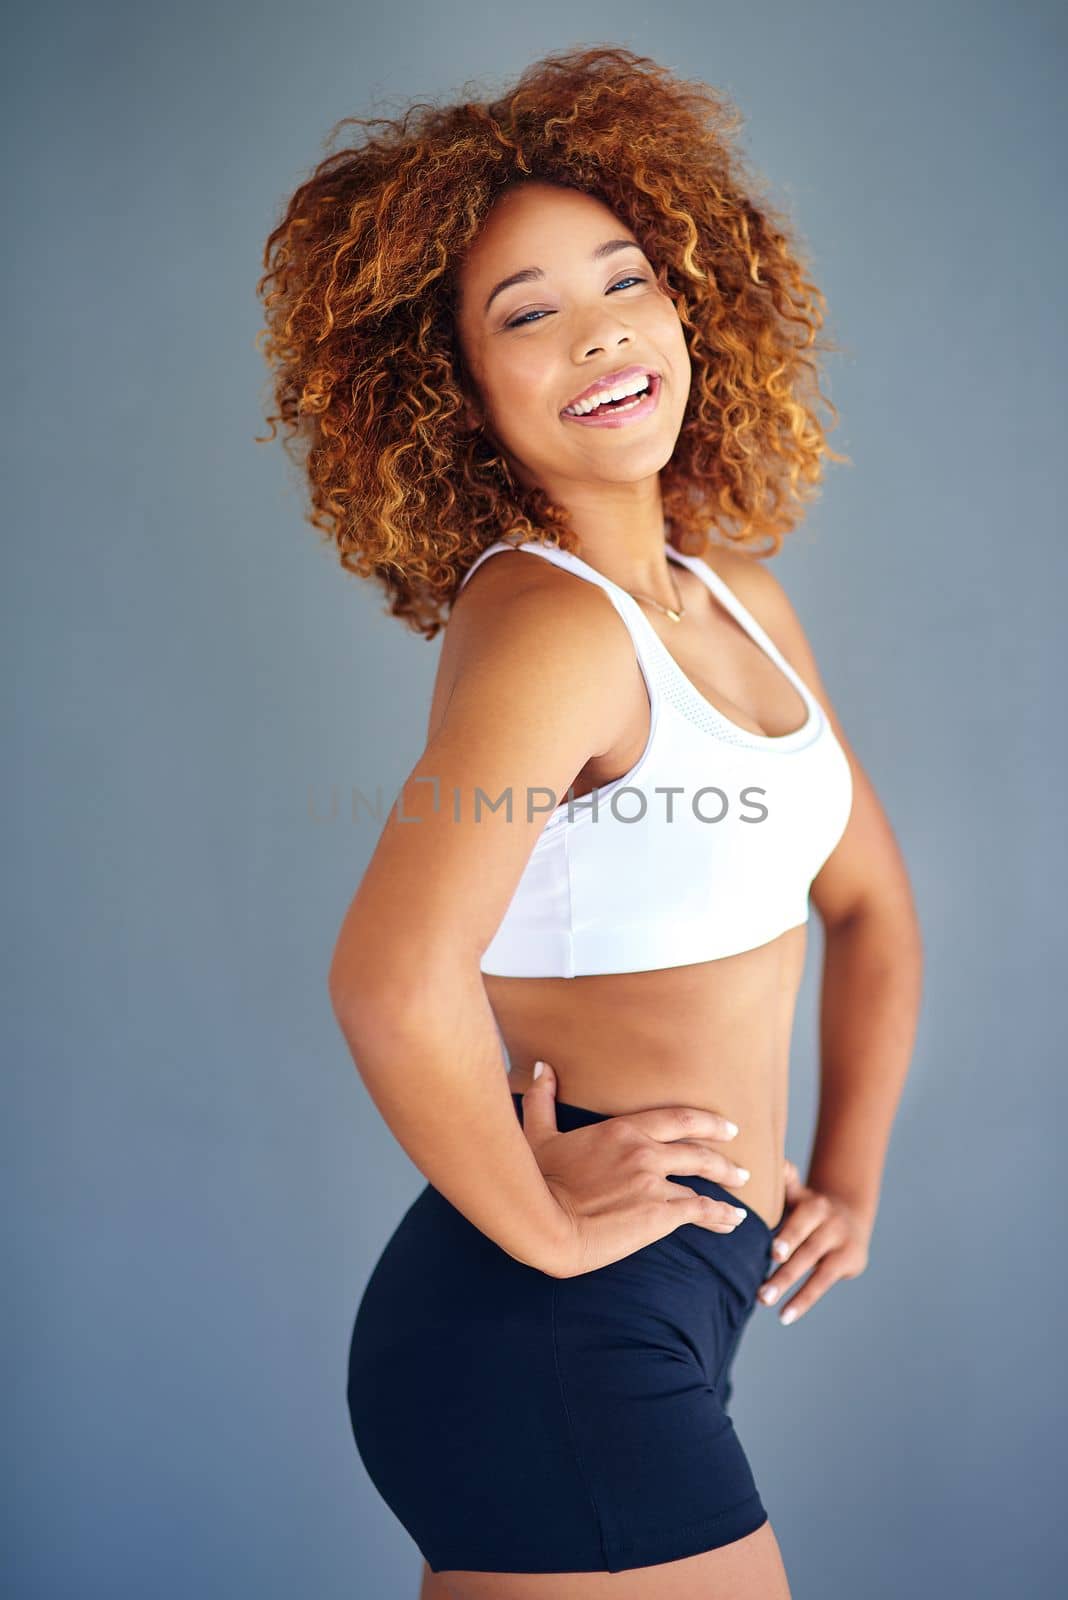 Im getting slimmer and healthier everyday. a sporty young woman posing against a grey background